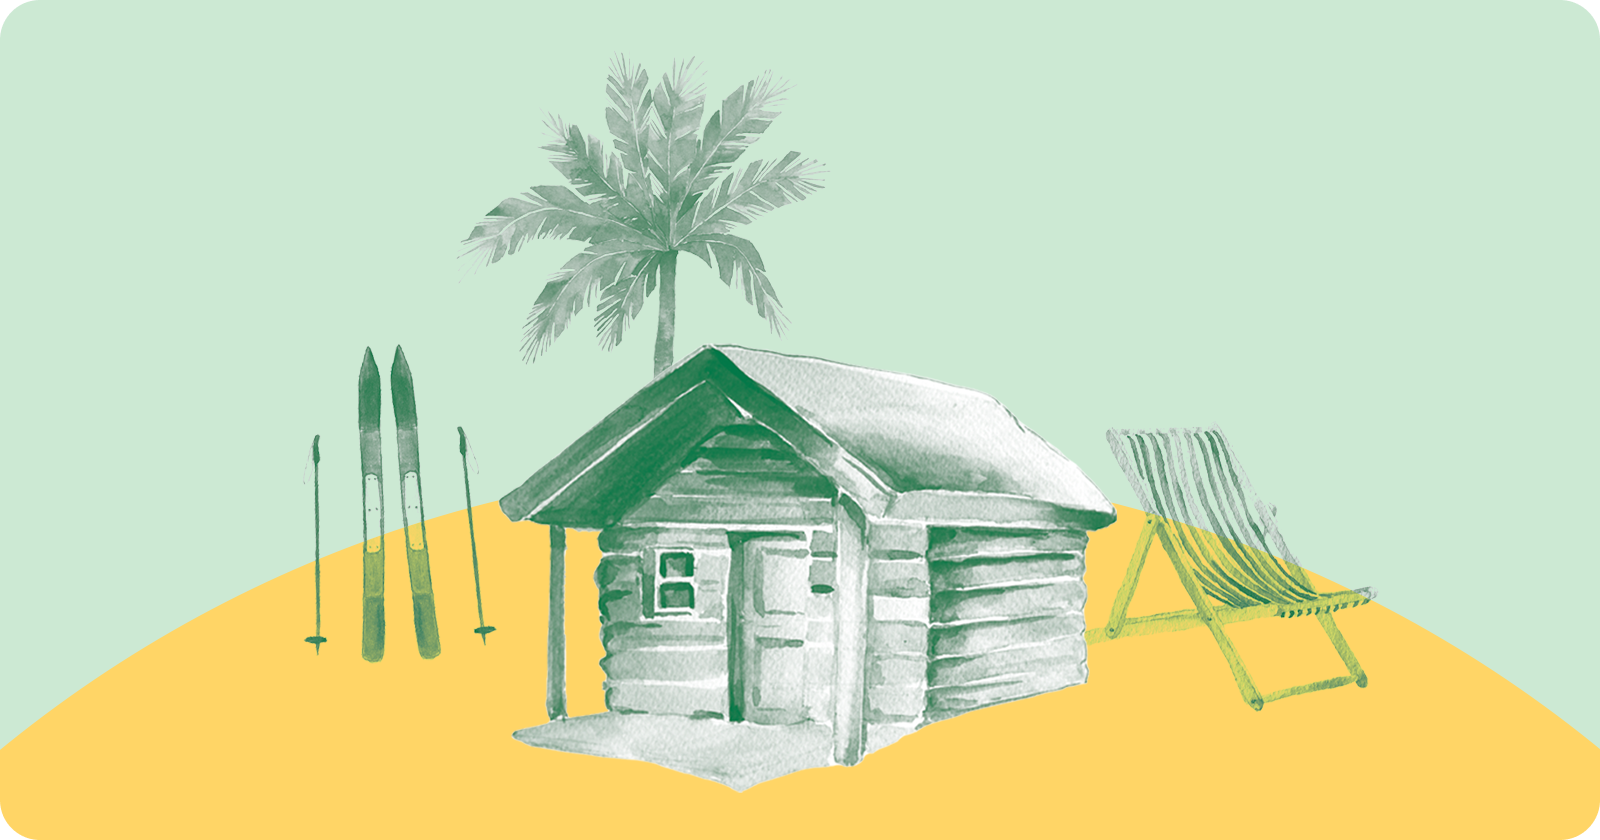 "Vacation home with skis, palm tree and beach chair